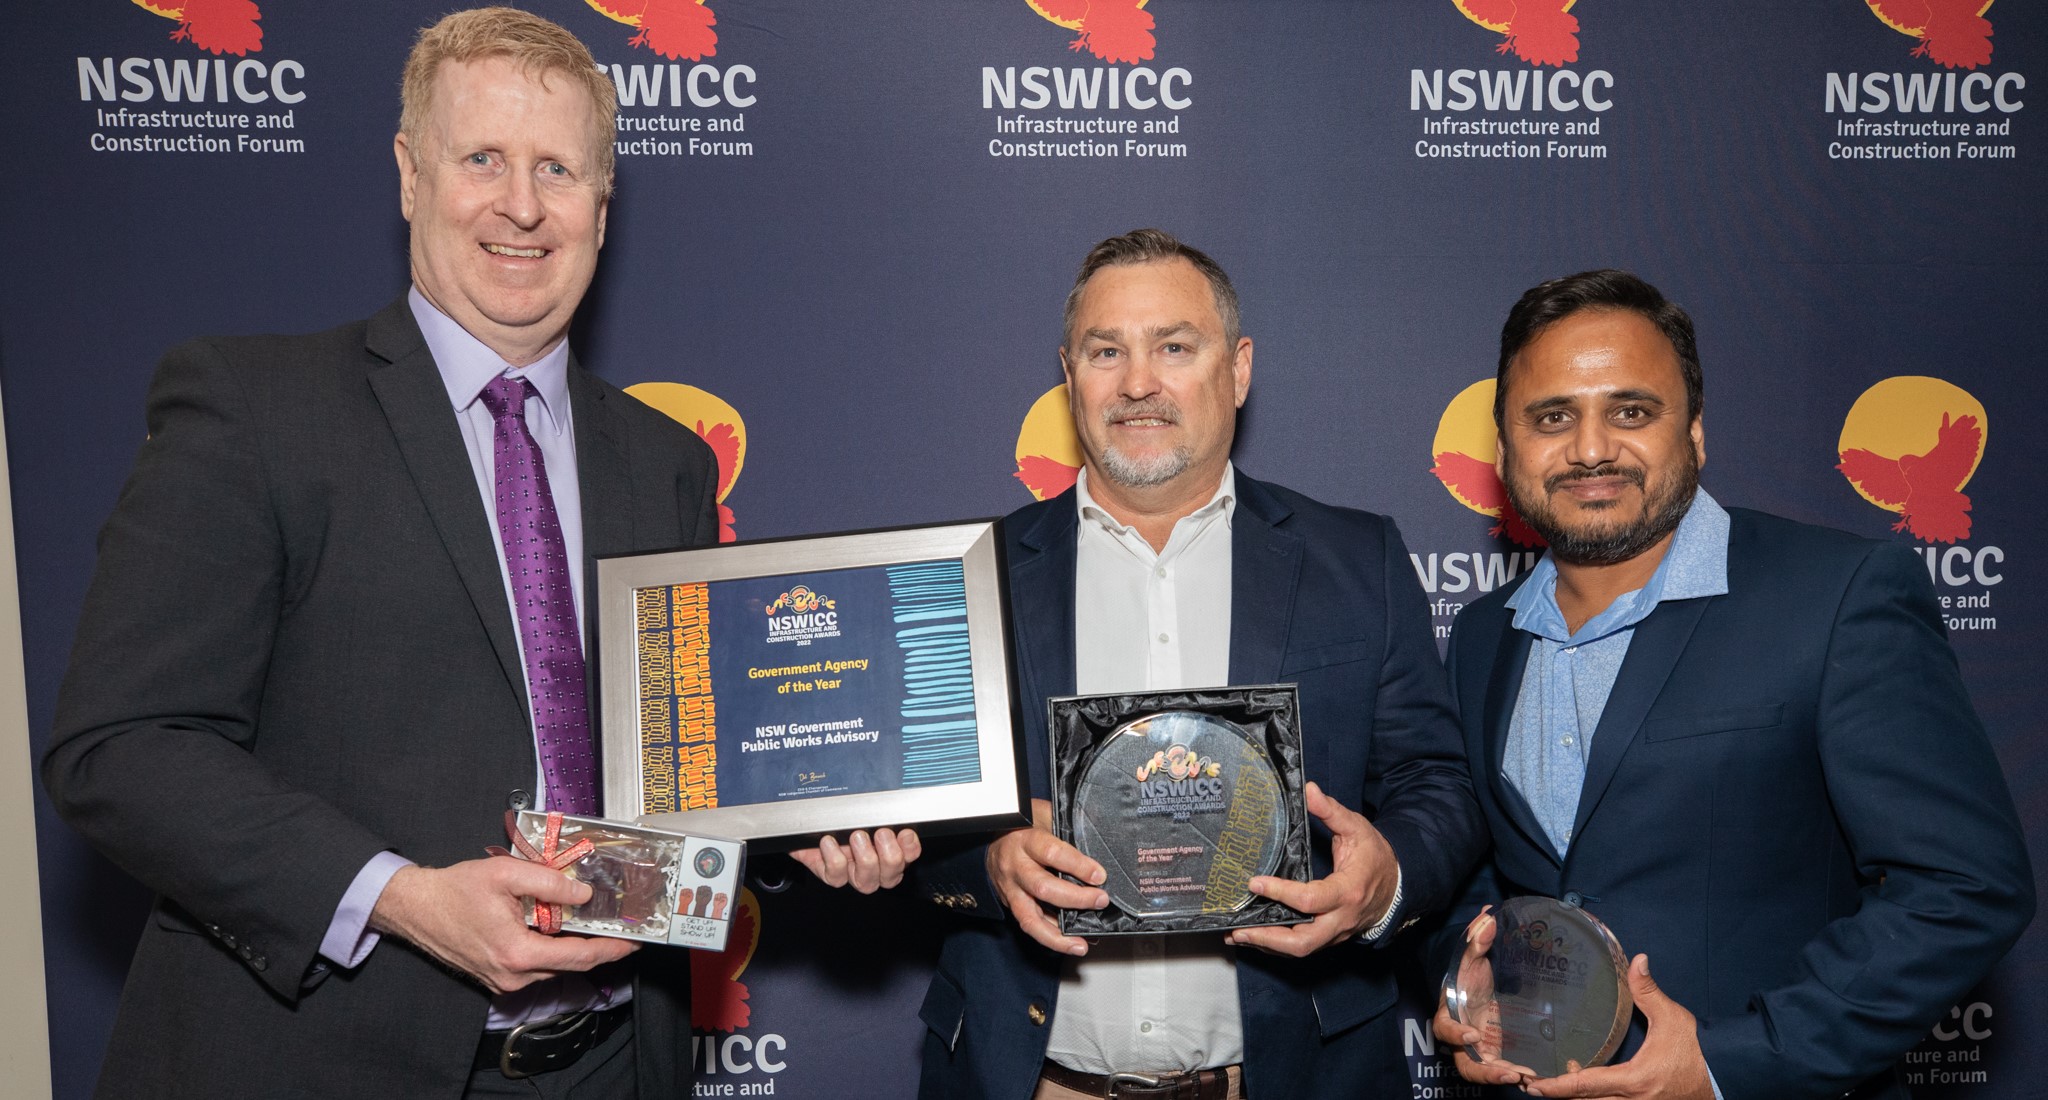 NSWICC - Government Agency of the Year Award